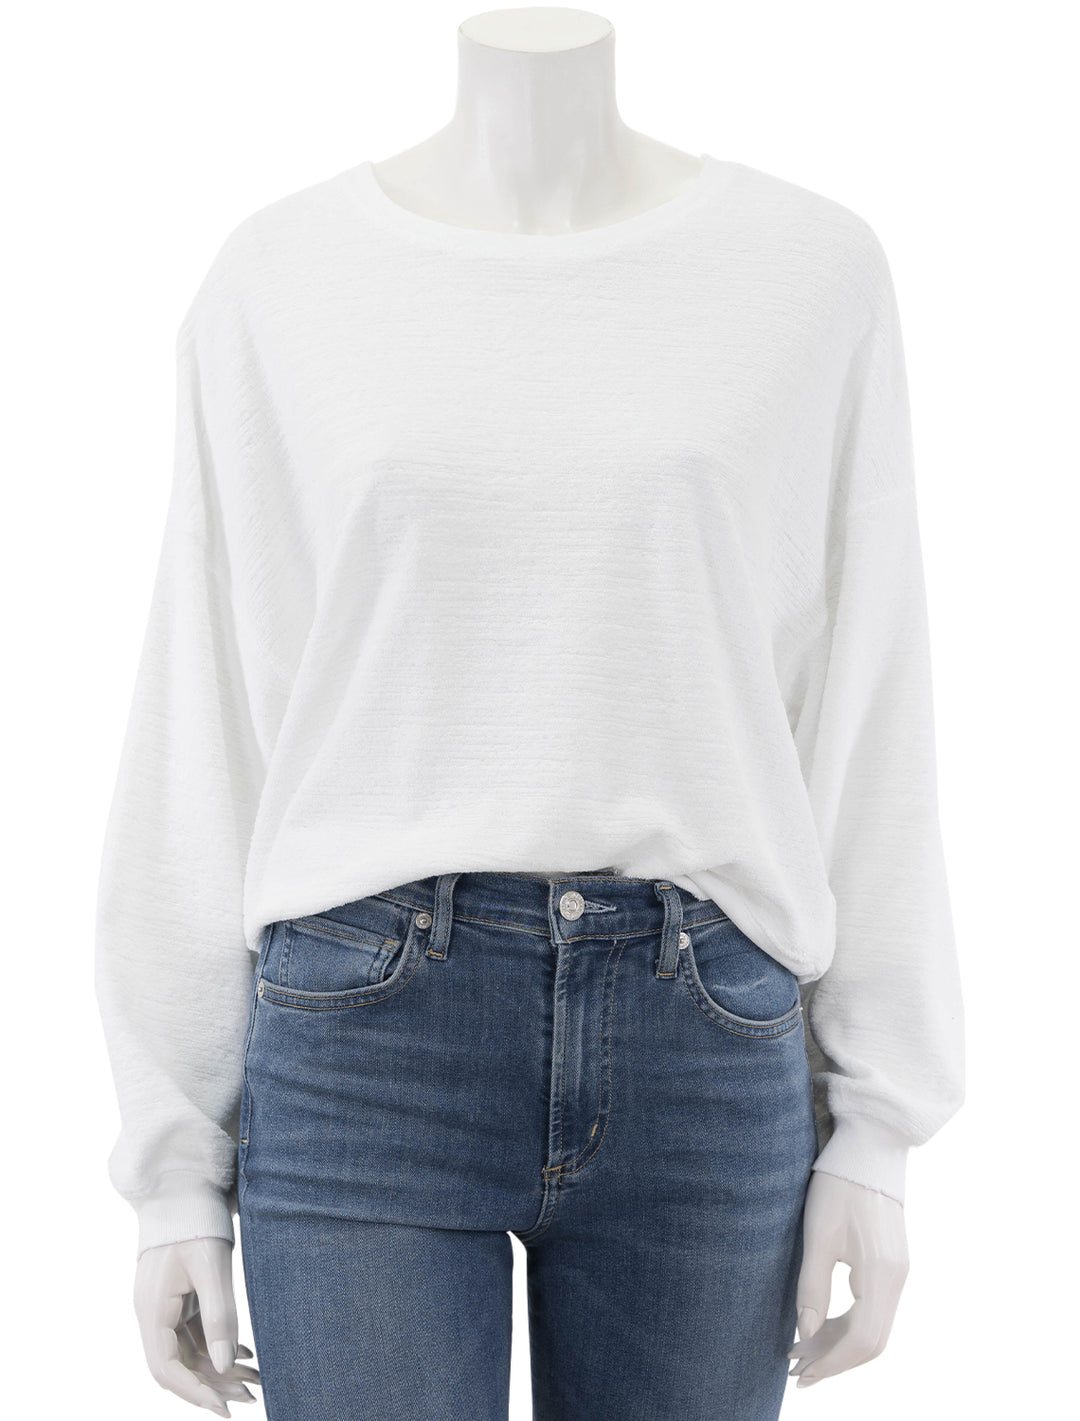 Front view of AMO's easy sweatshirt in white.